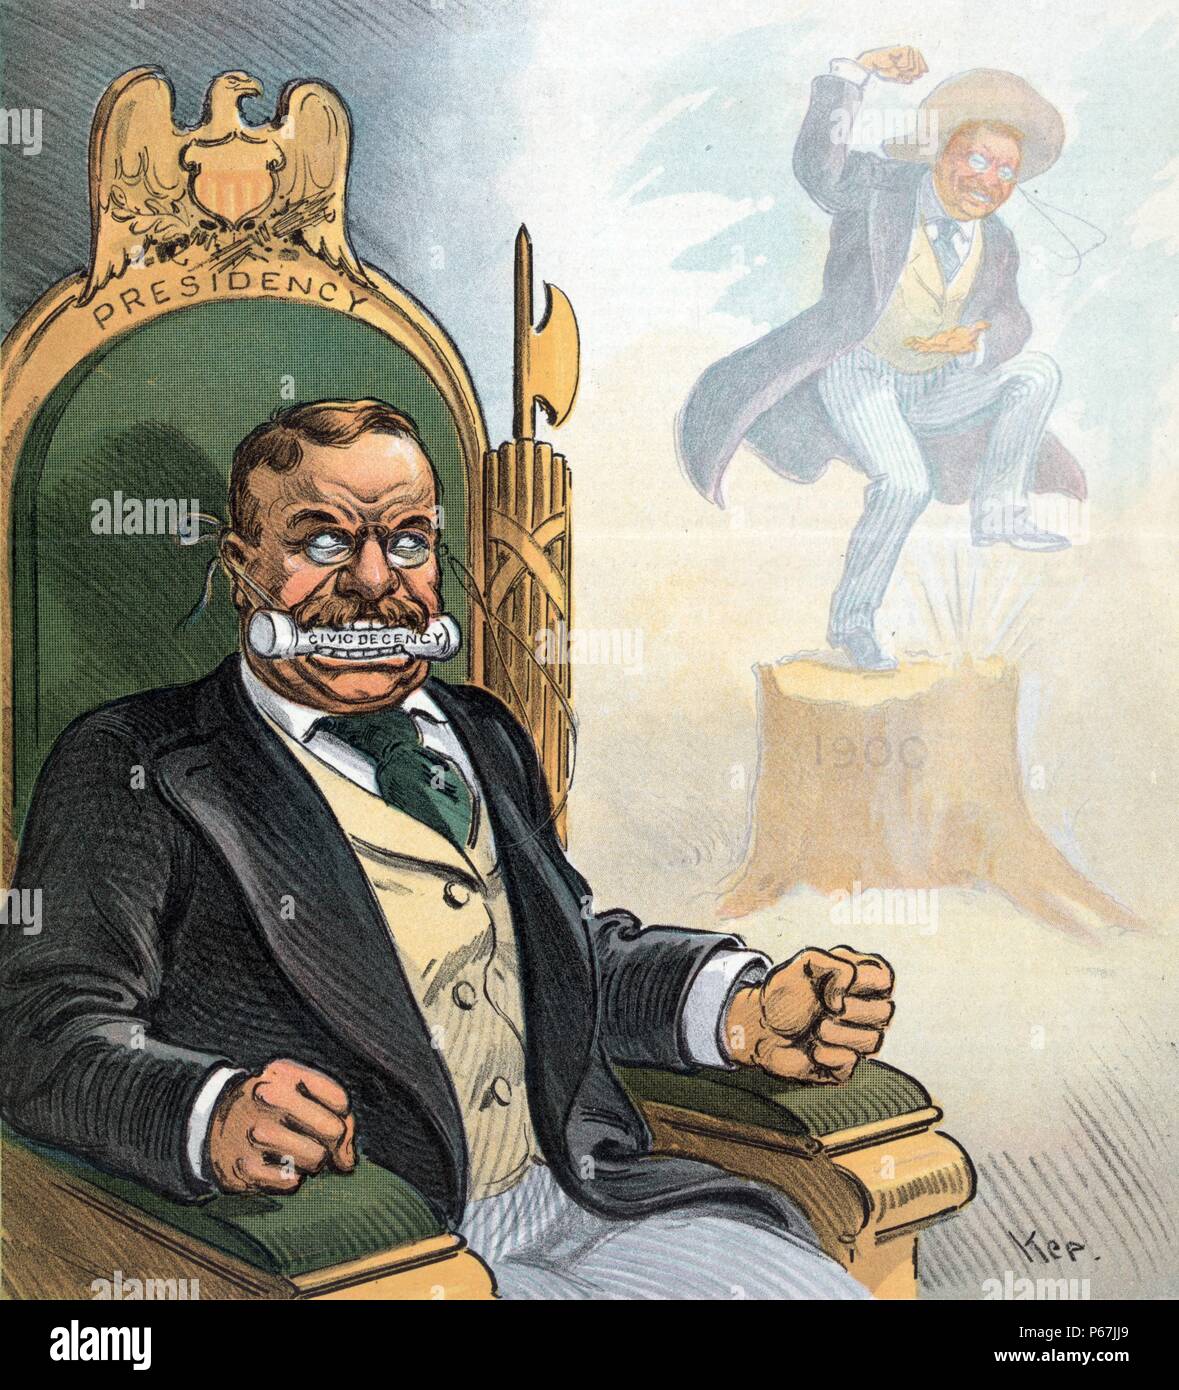 The good old days' President Theodore Roosevelt sitting in a chair labelled 'Presidency' with a fasces behind his left shoulder and with a gag labelled 'Civil Decency' in his mouth; he is looking at a spirit of himself from 1900 when he could speak freely. Stock Photo